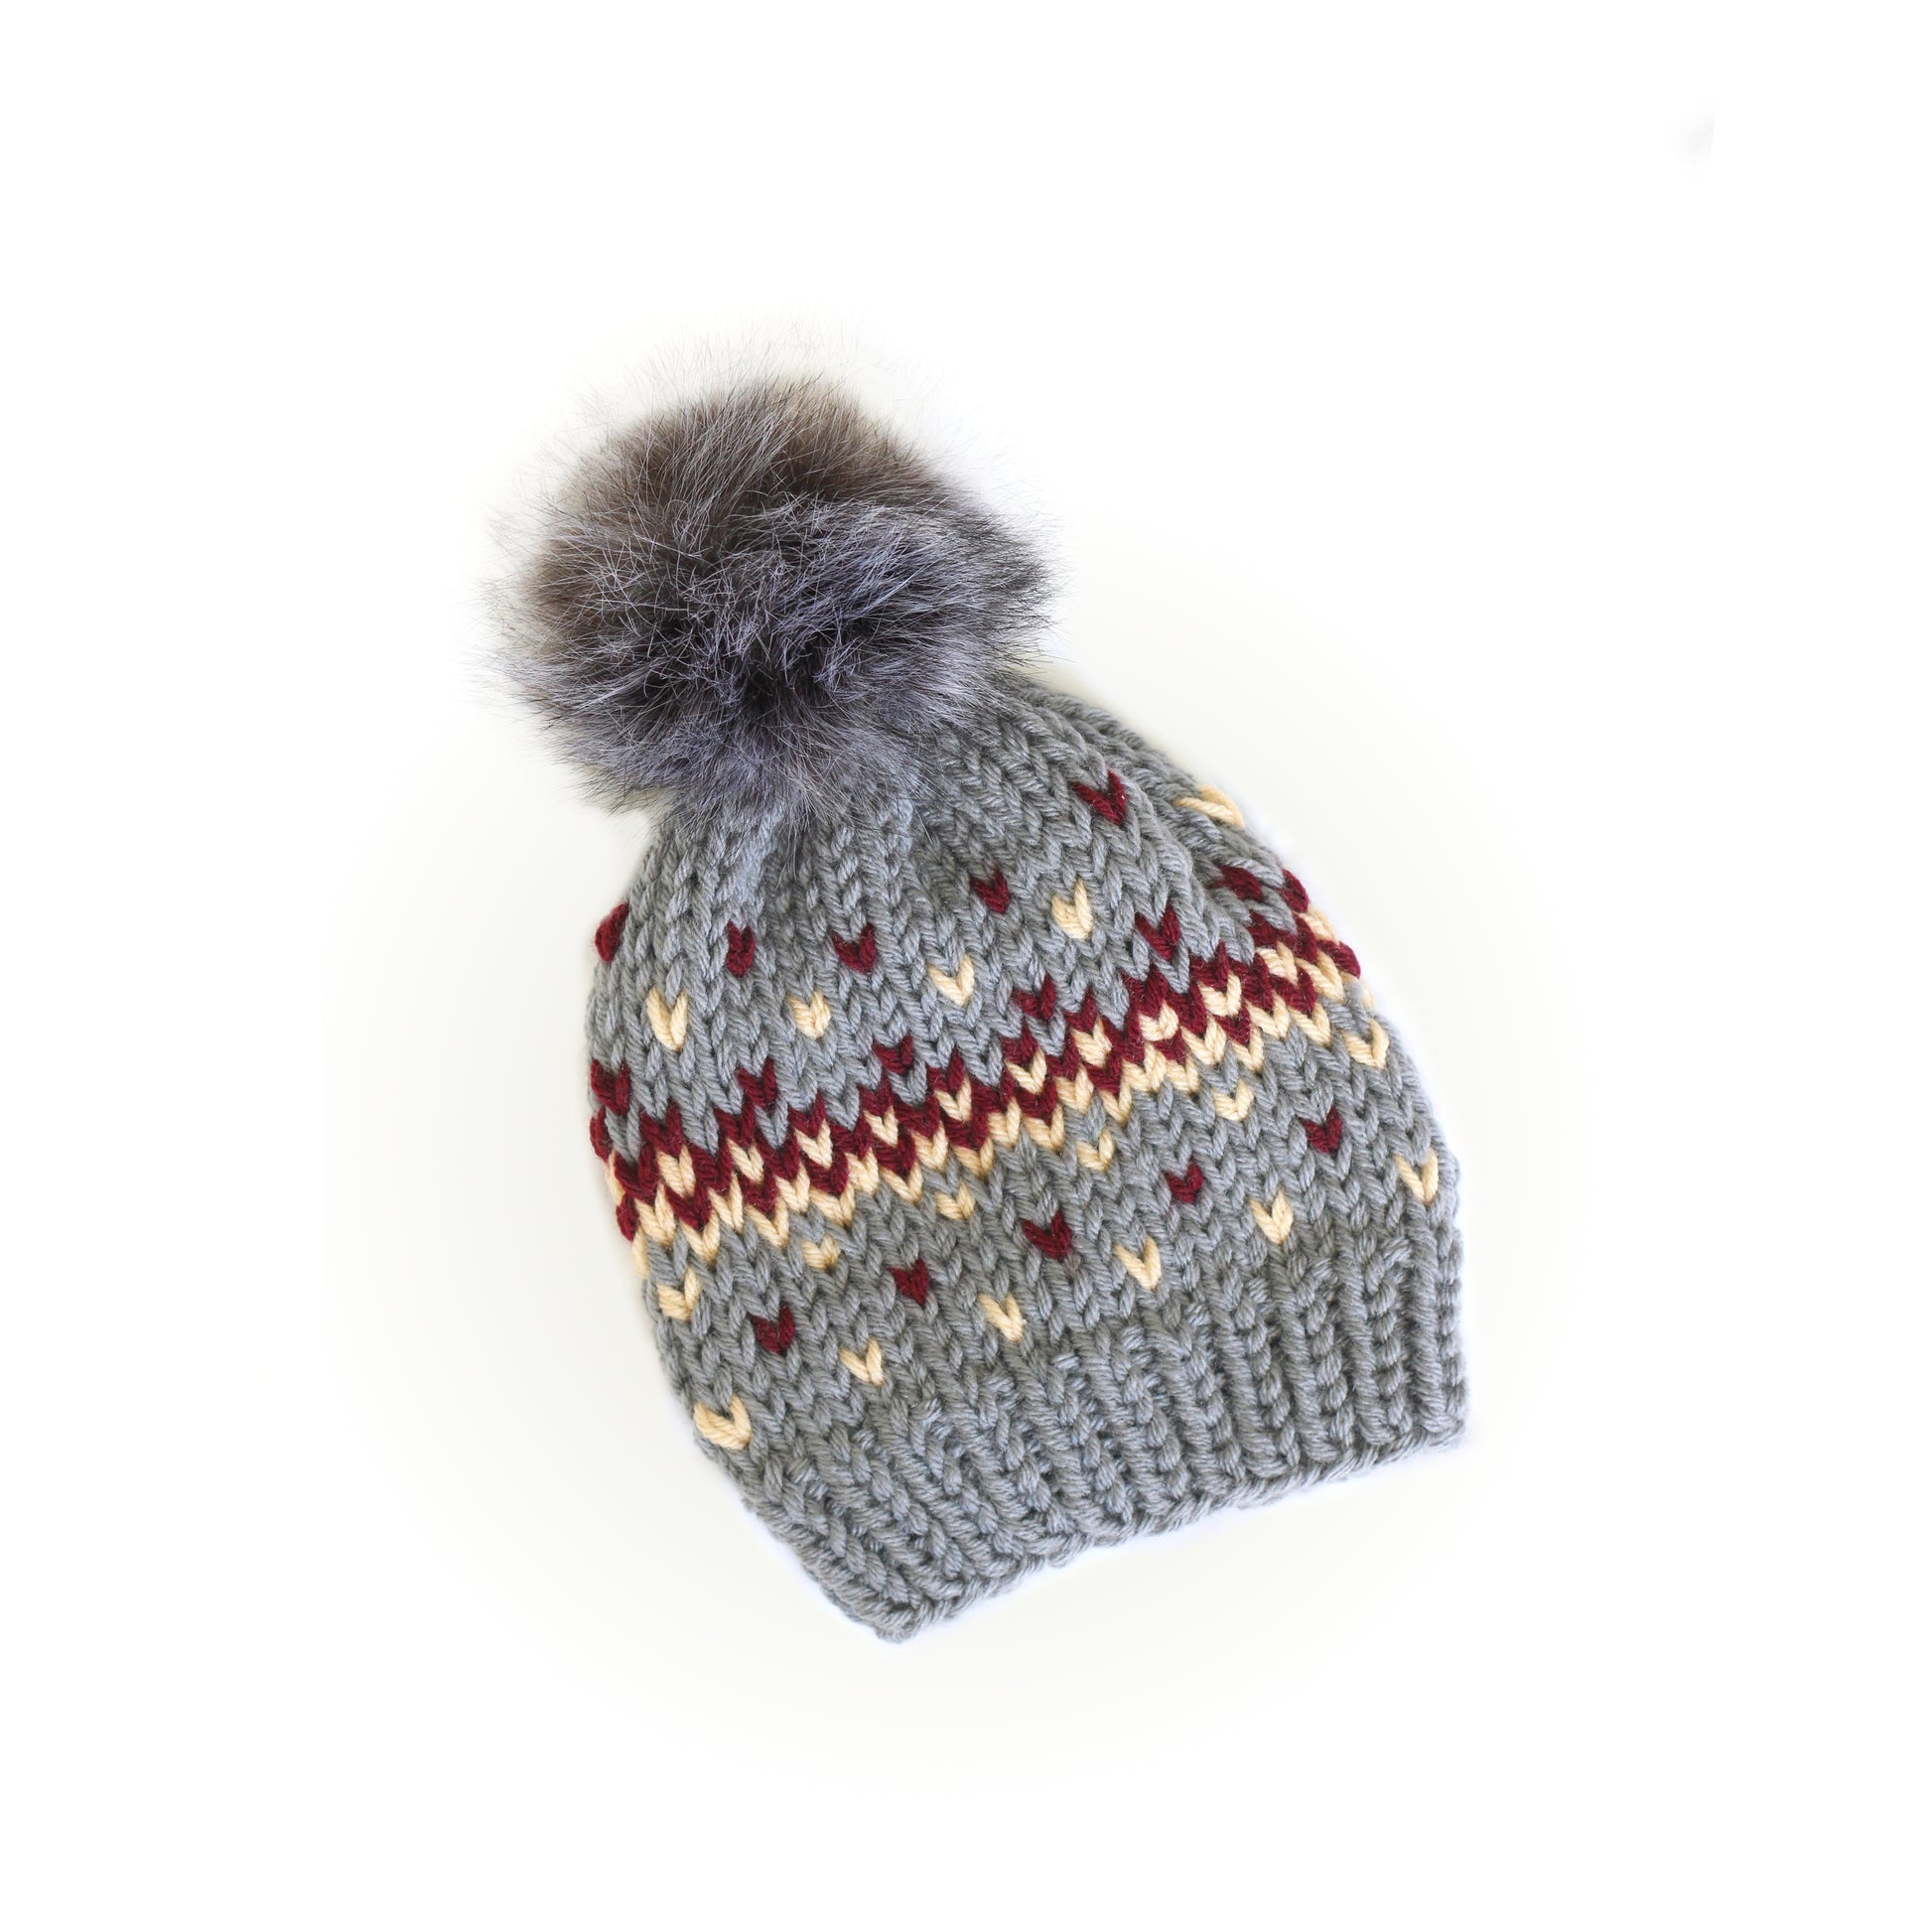 Knitting pattern for a fair isle hat